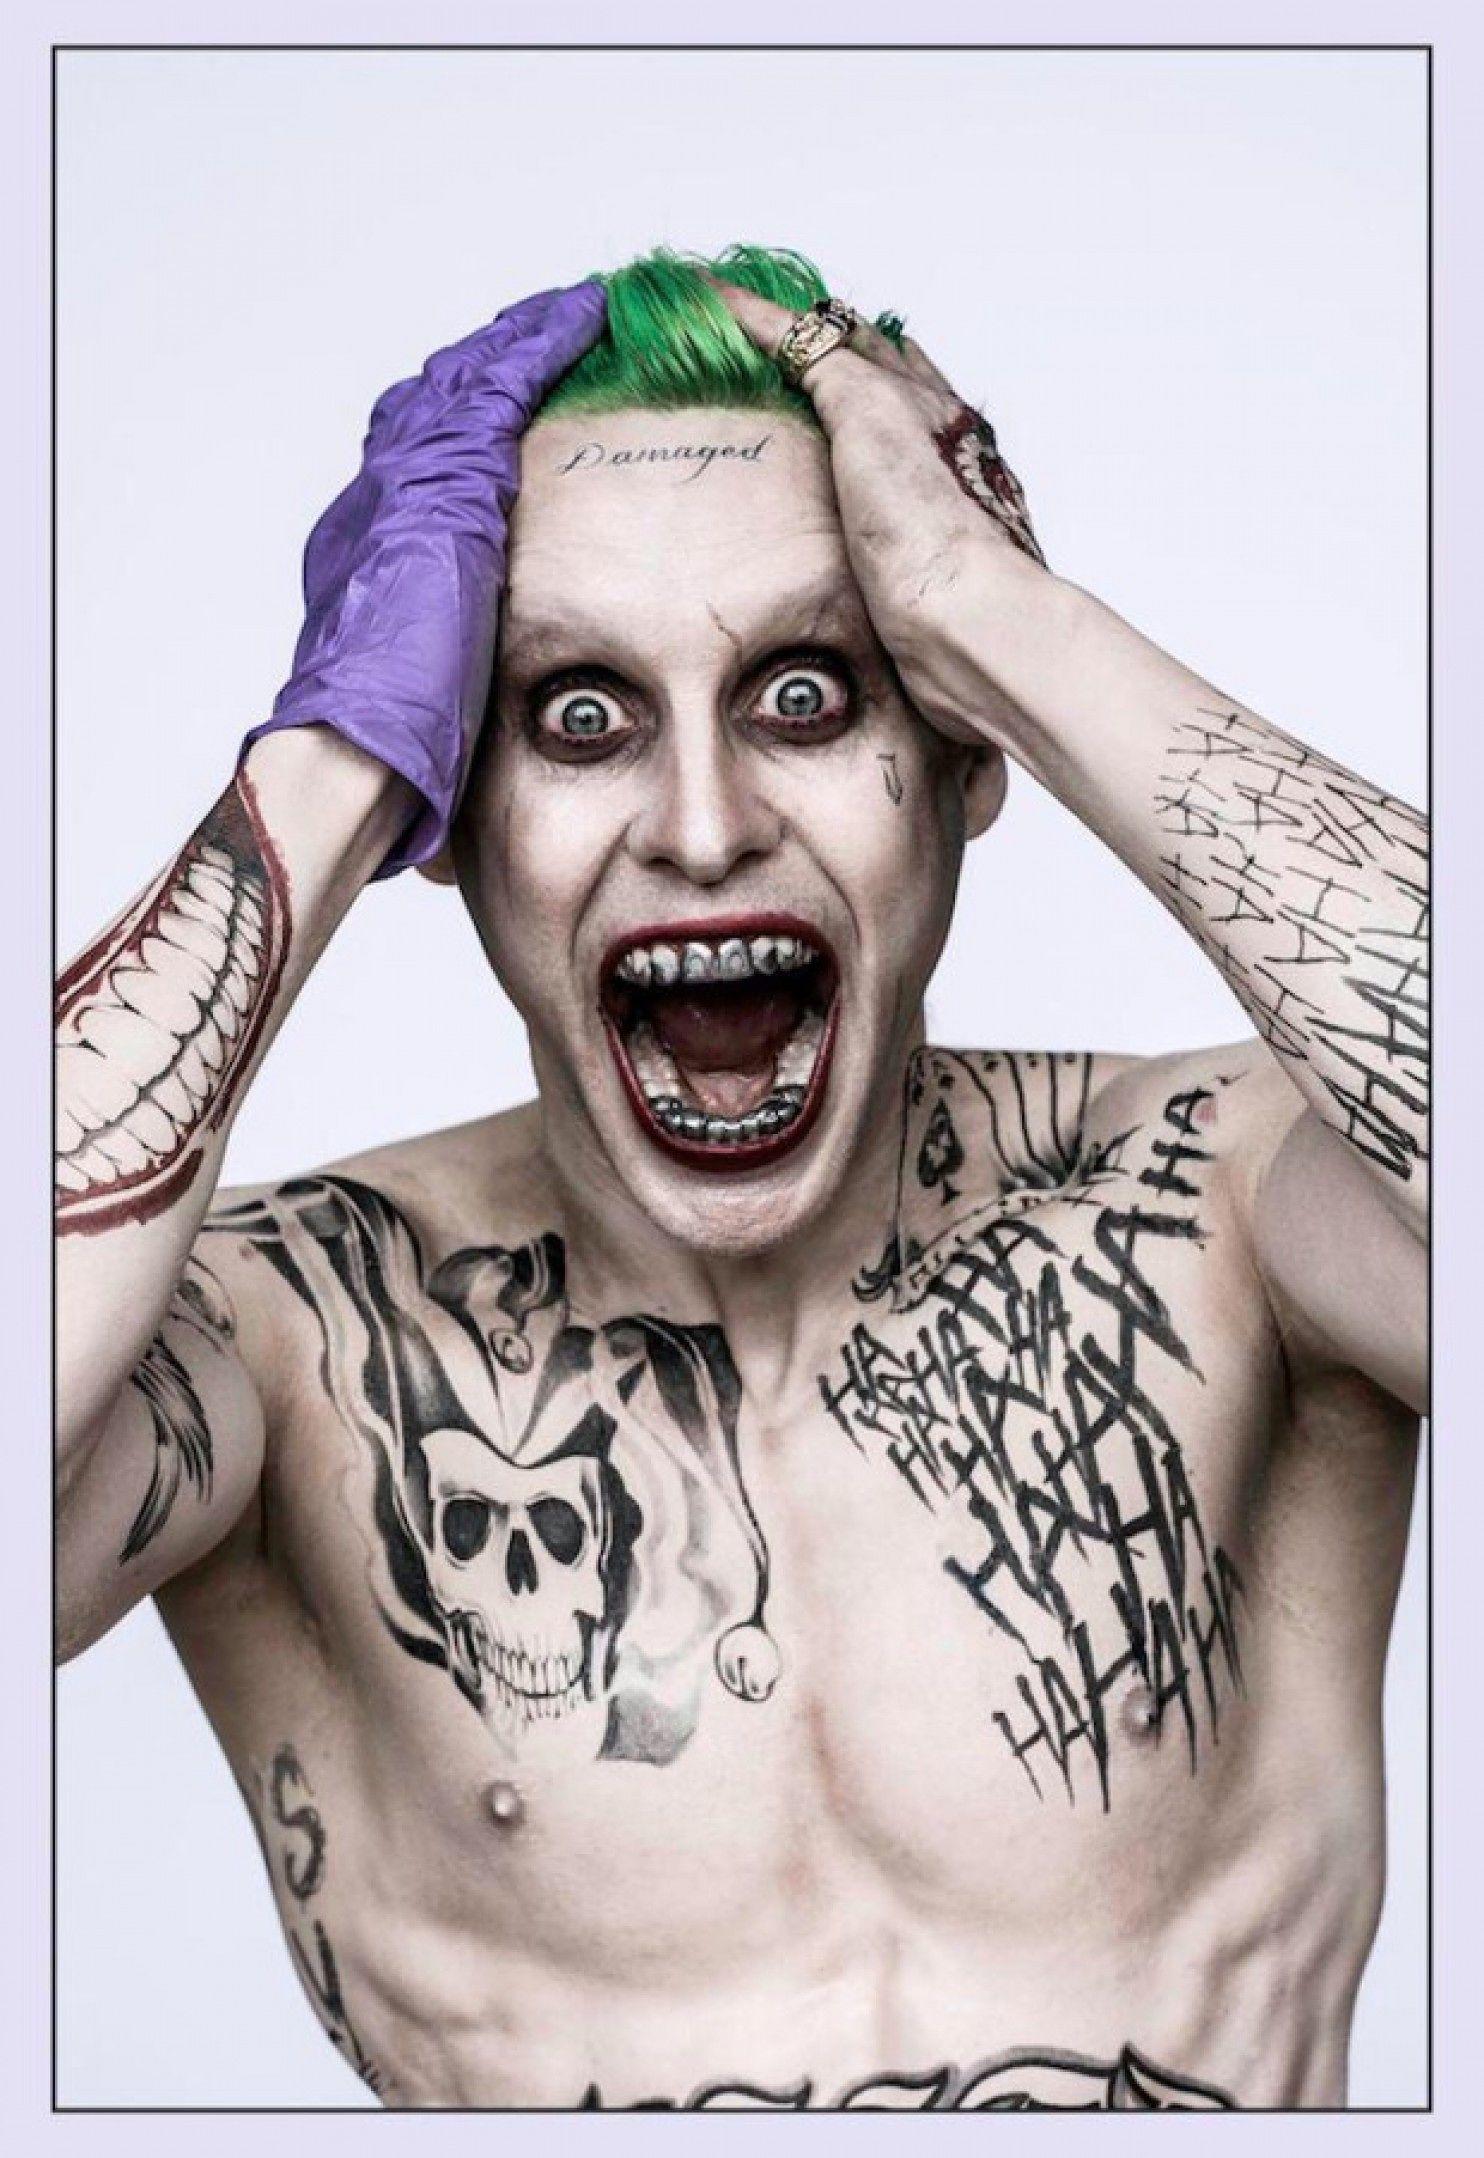 what-s-our-new-joker-look-like-without-the-tattoos-and-grill-vamp-joker-379015